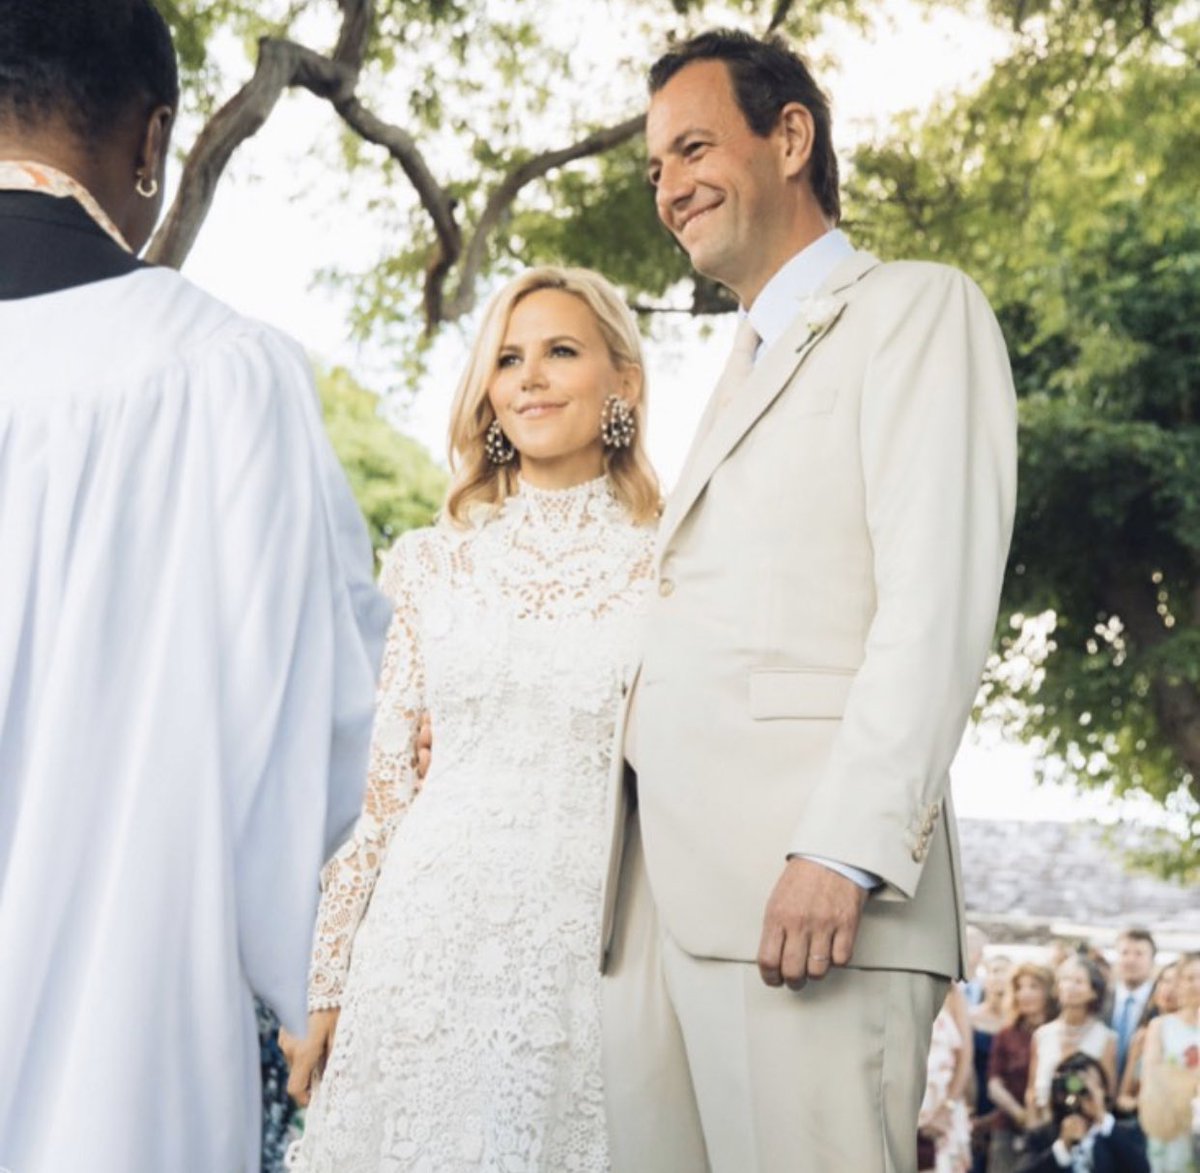 Tory Burch Is Engaged